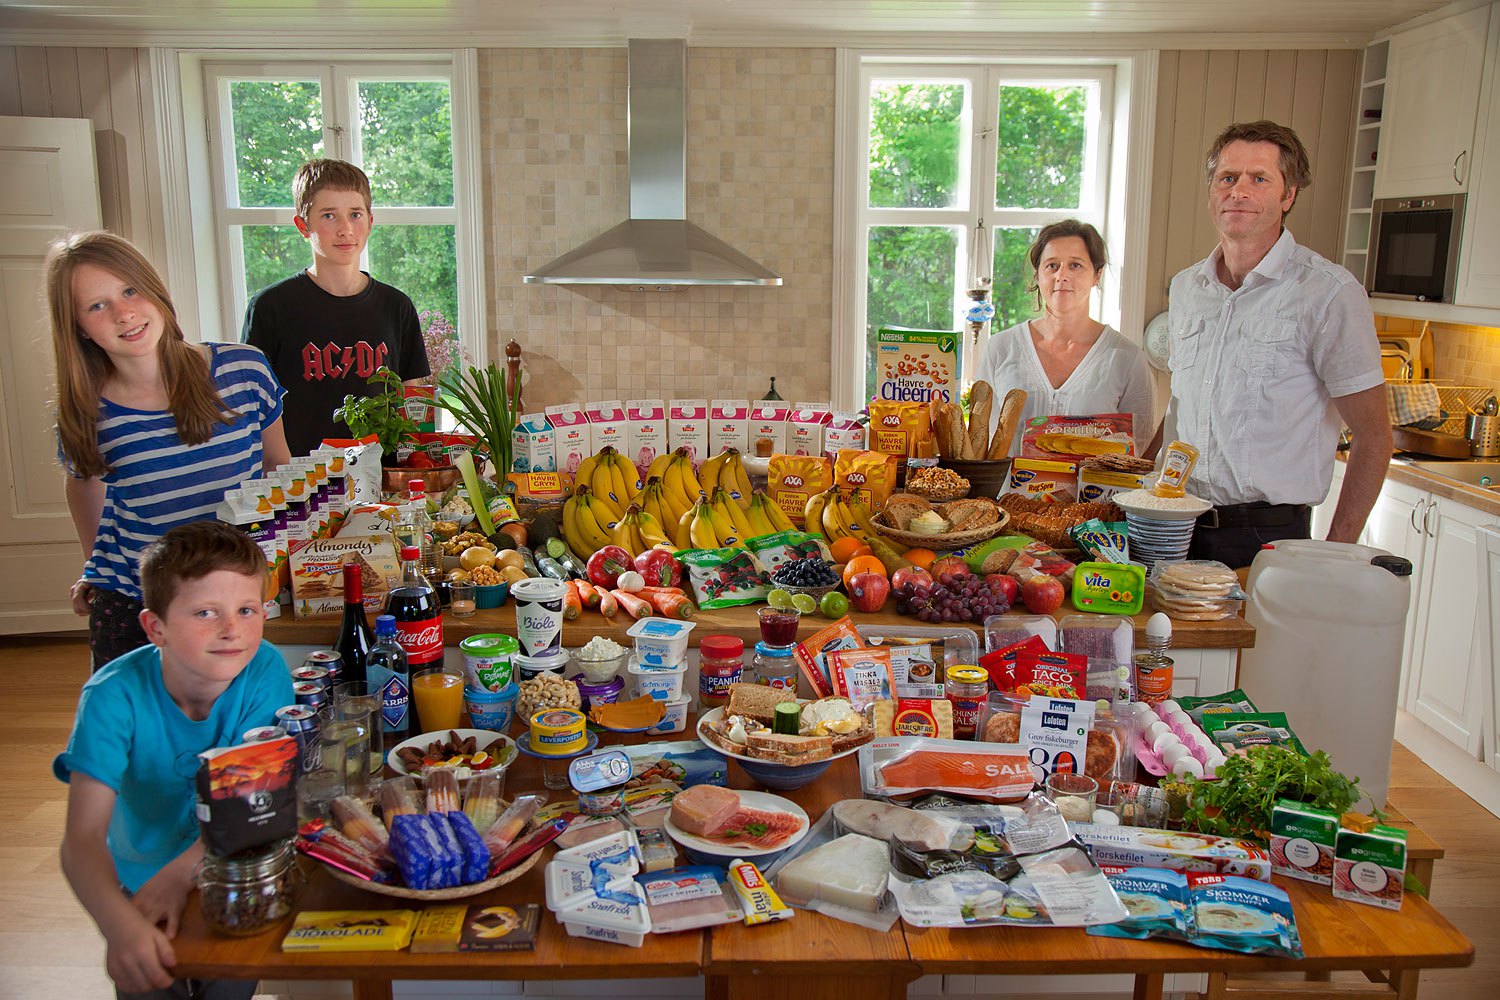 Norway: The Glad Ostensen family in Gjerdrum. Food expenditure for one week: 4265.89 Norwegian Kroner or $731.71. Favorite foods: mutton in cabbage, lasagne, and chocolate.